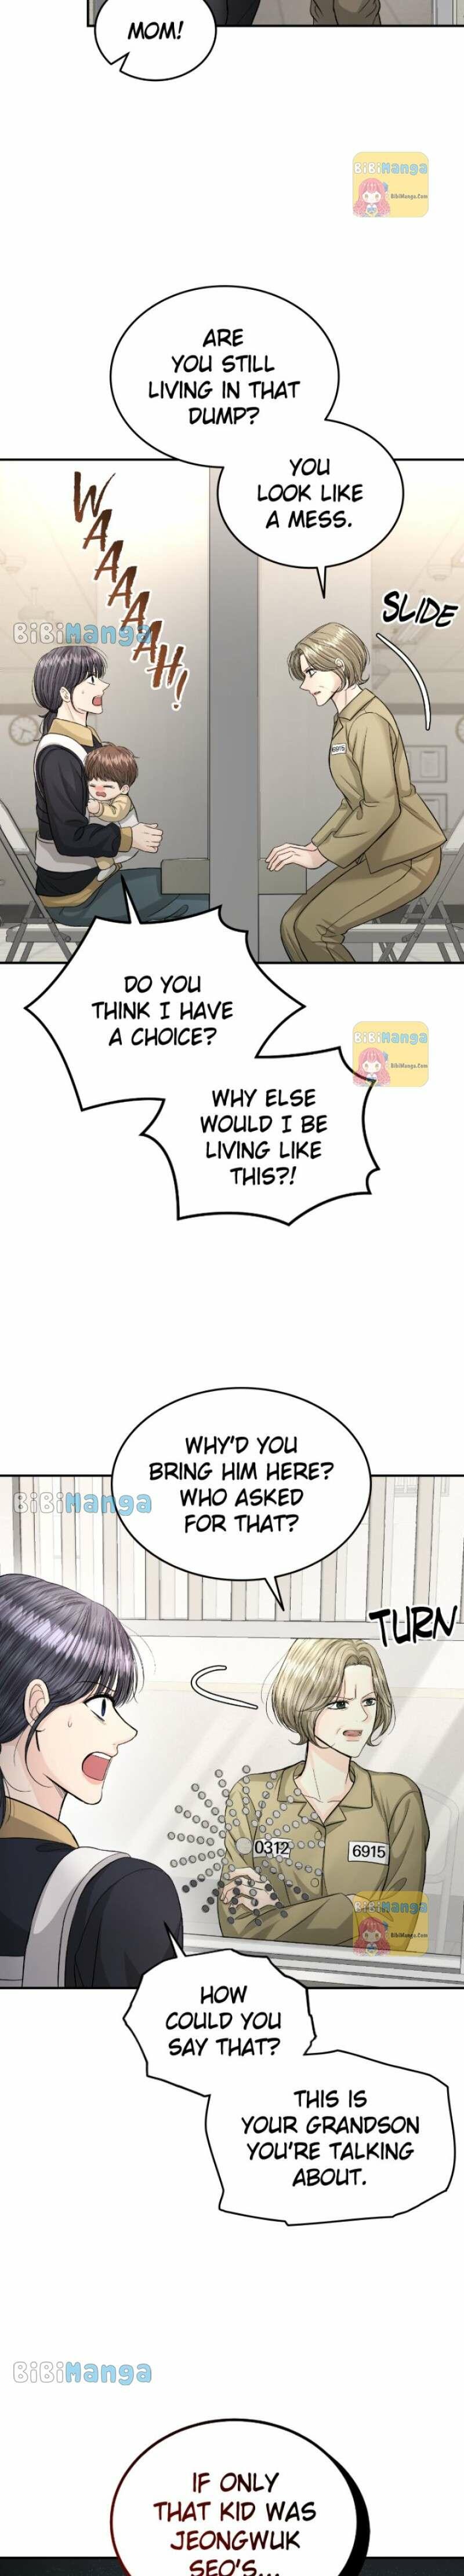 The Essence Of A Perfect Marriage Chapter 122 page 3 - Mangakakalot